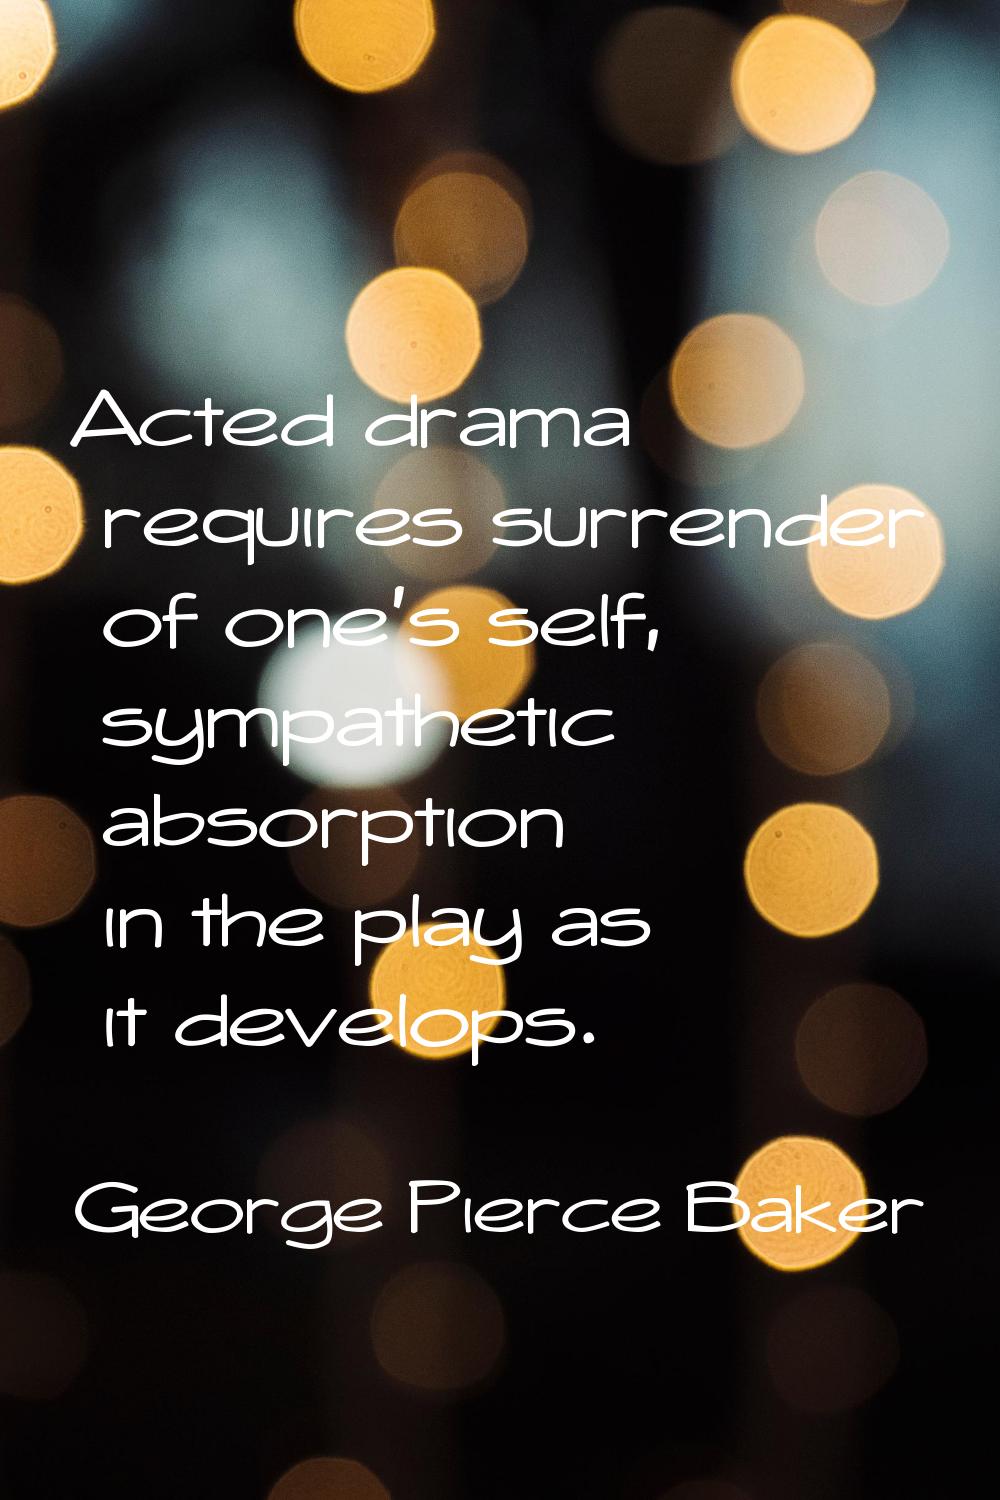 Acted drama requires surrender of one's self, sympathetic absorption in the play as it develops.